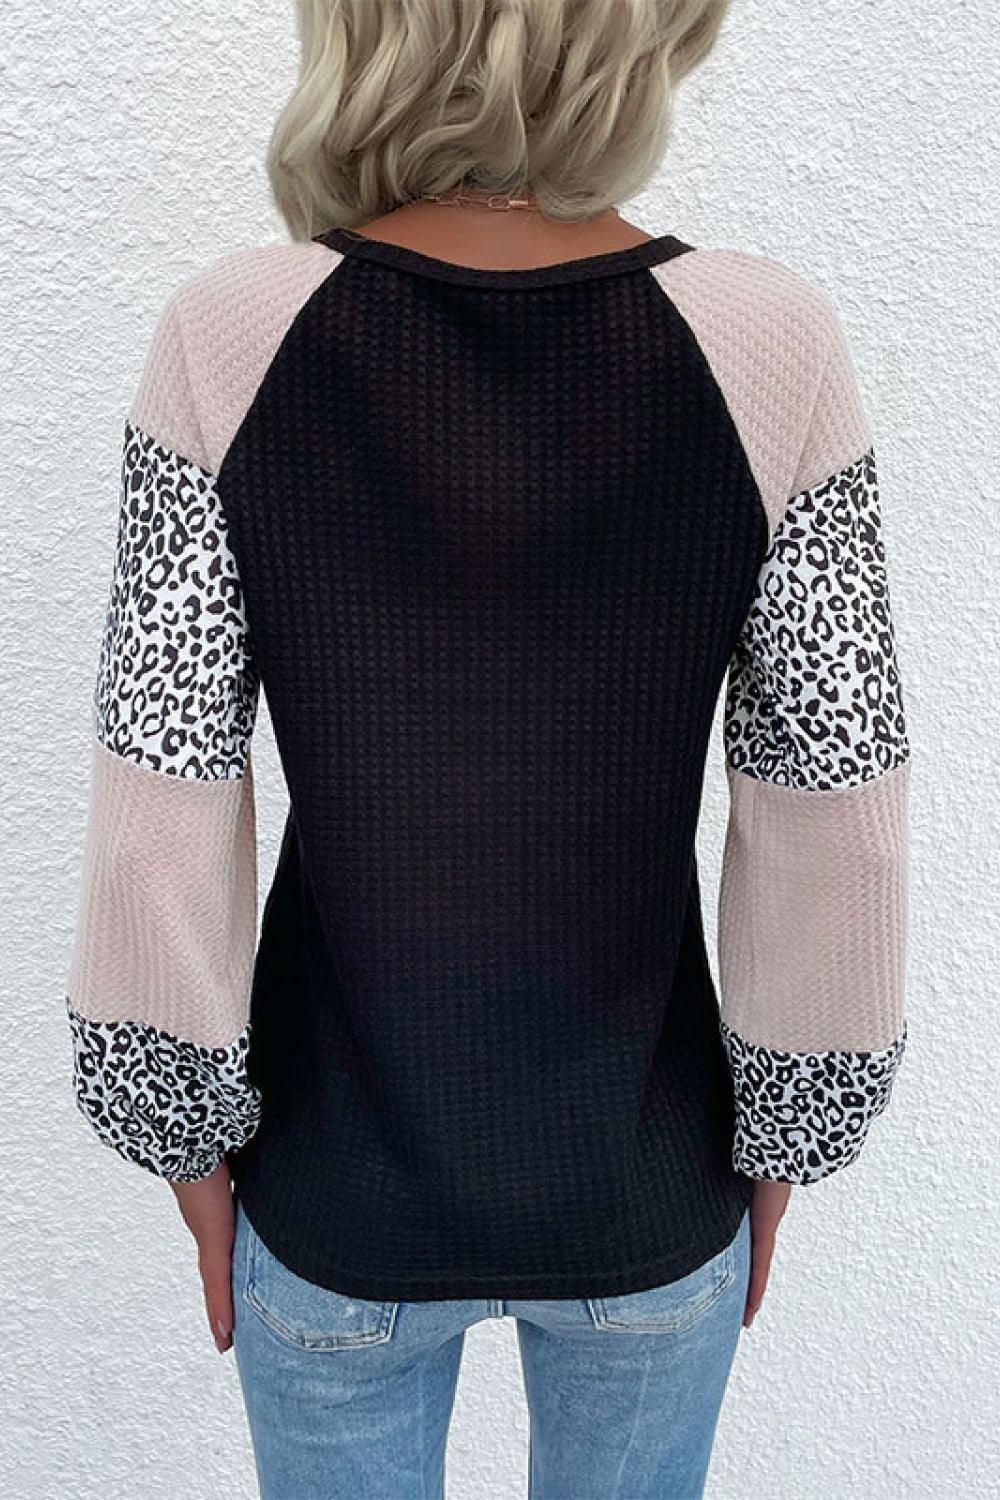 Contrast Leopard Print Waffle Knit Tee - Trendha